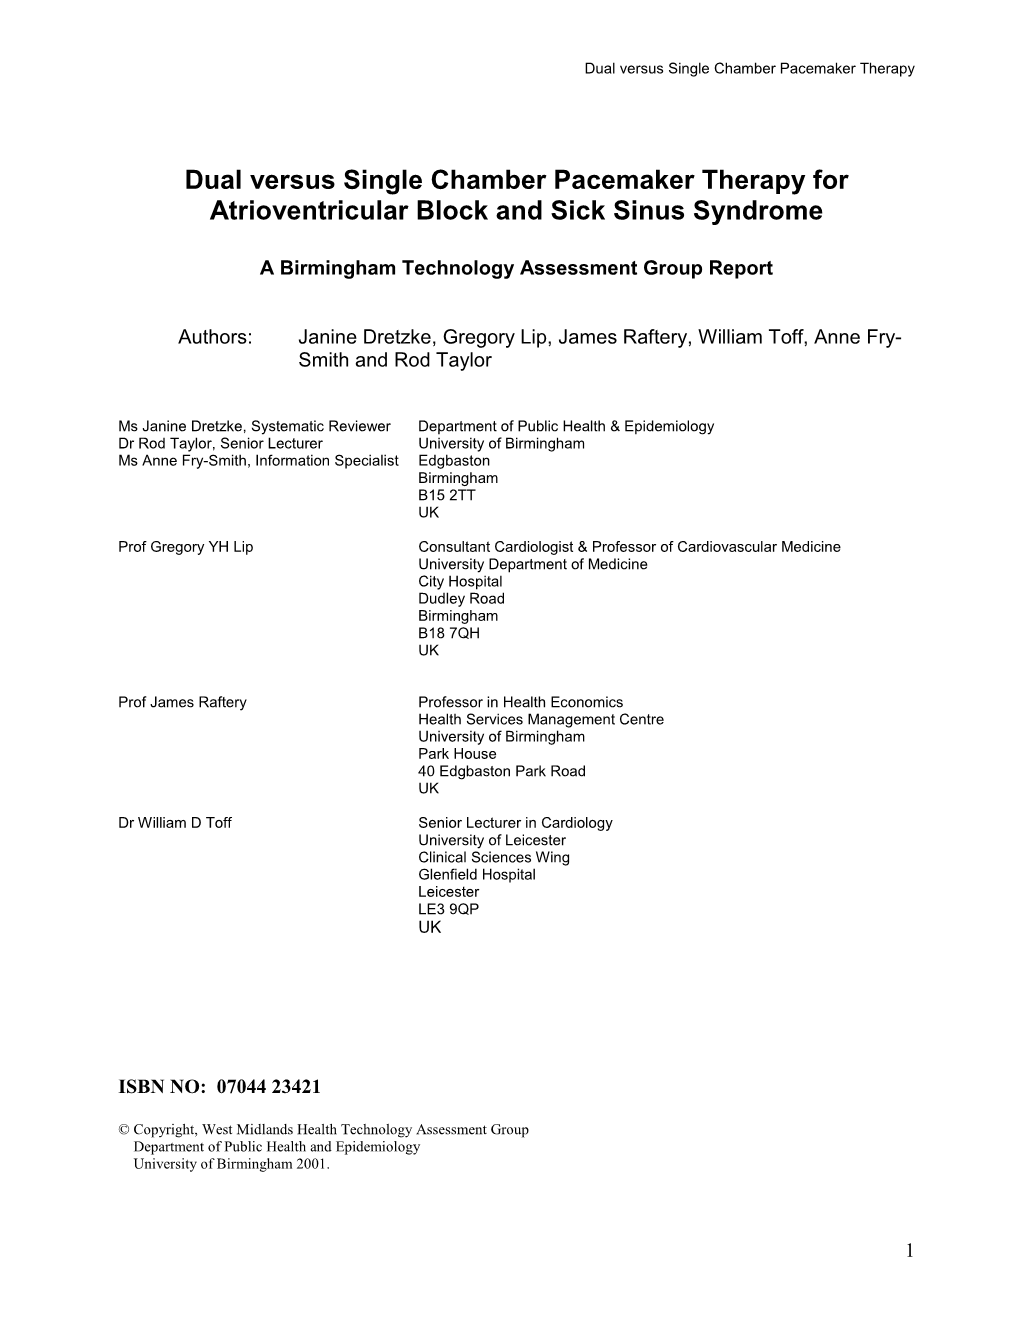 Dual Versus Single Chamber Pacemaker Therapy for Atrioventricular Block and Sick Sinus Syndrome